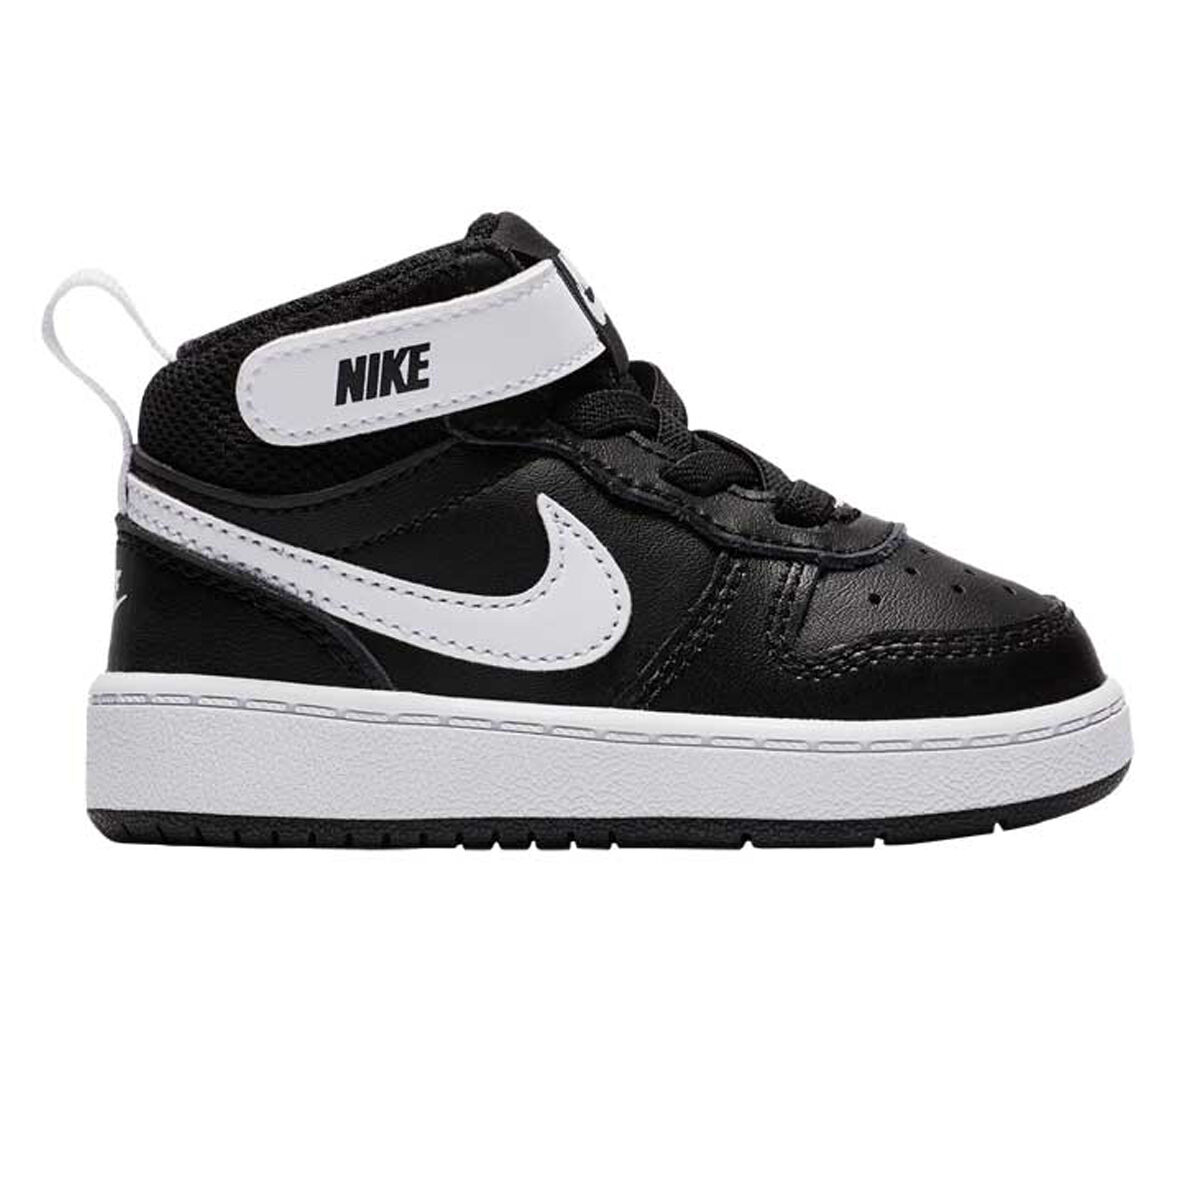 Nike Court Borough Mid 2 Toddlers Shoes 